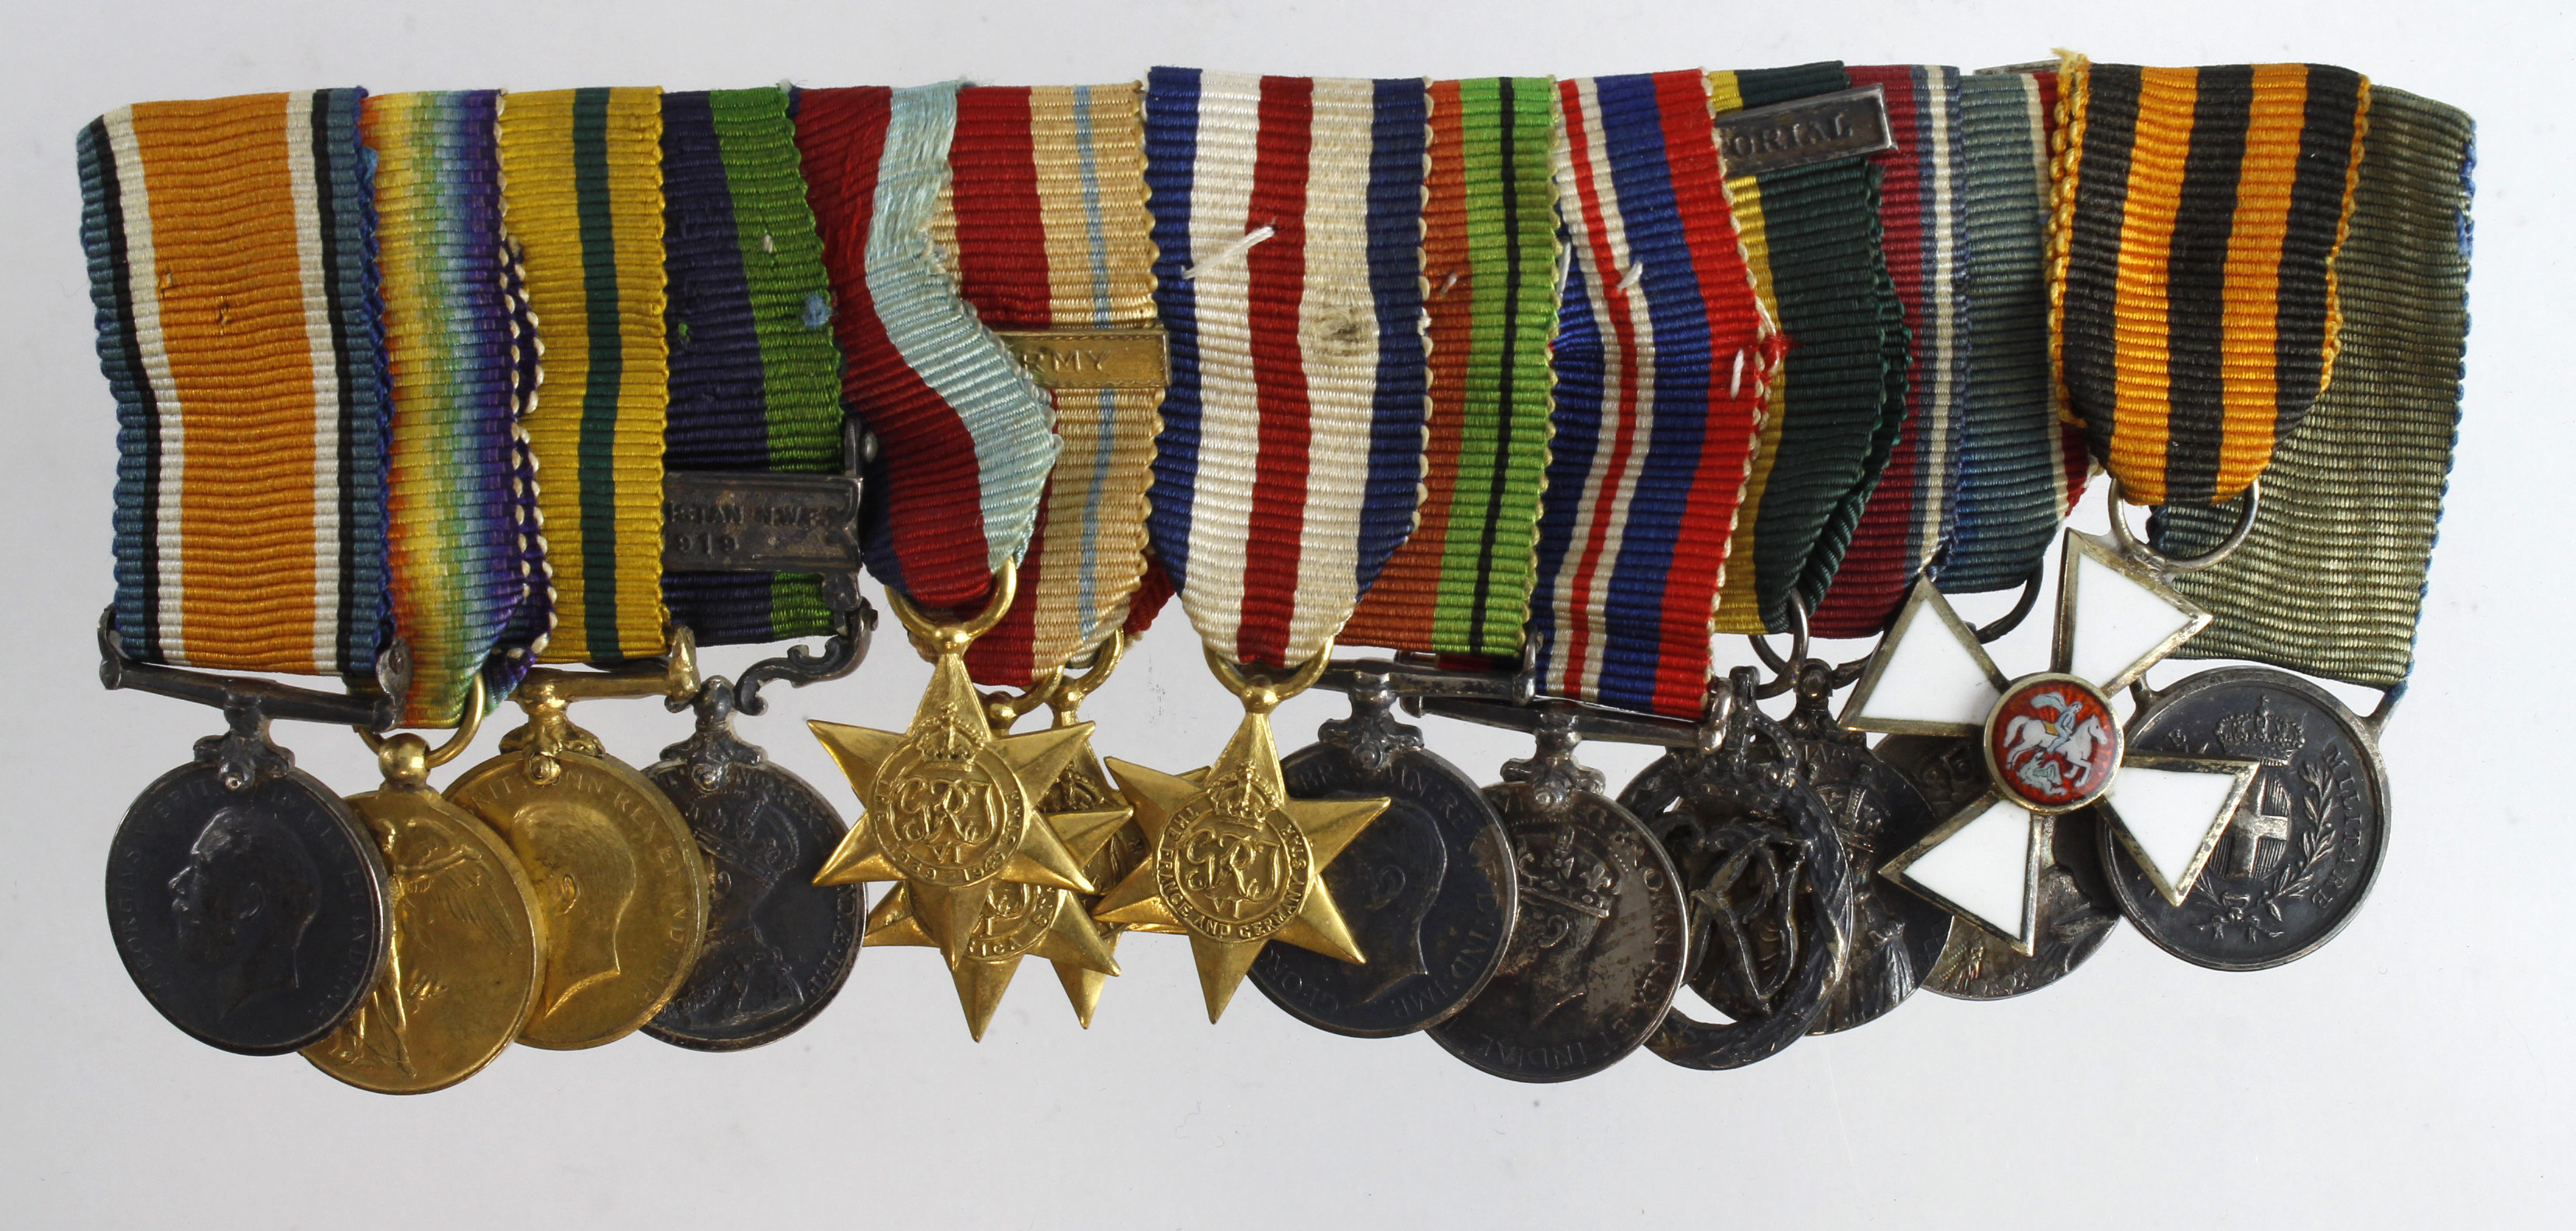 Minature Medal group mounted as worn - BWM & Victory Medal, Territorial War Medal, IGS GV with